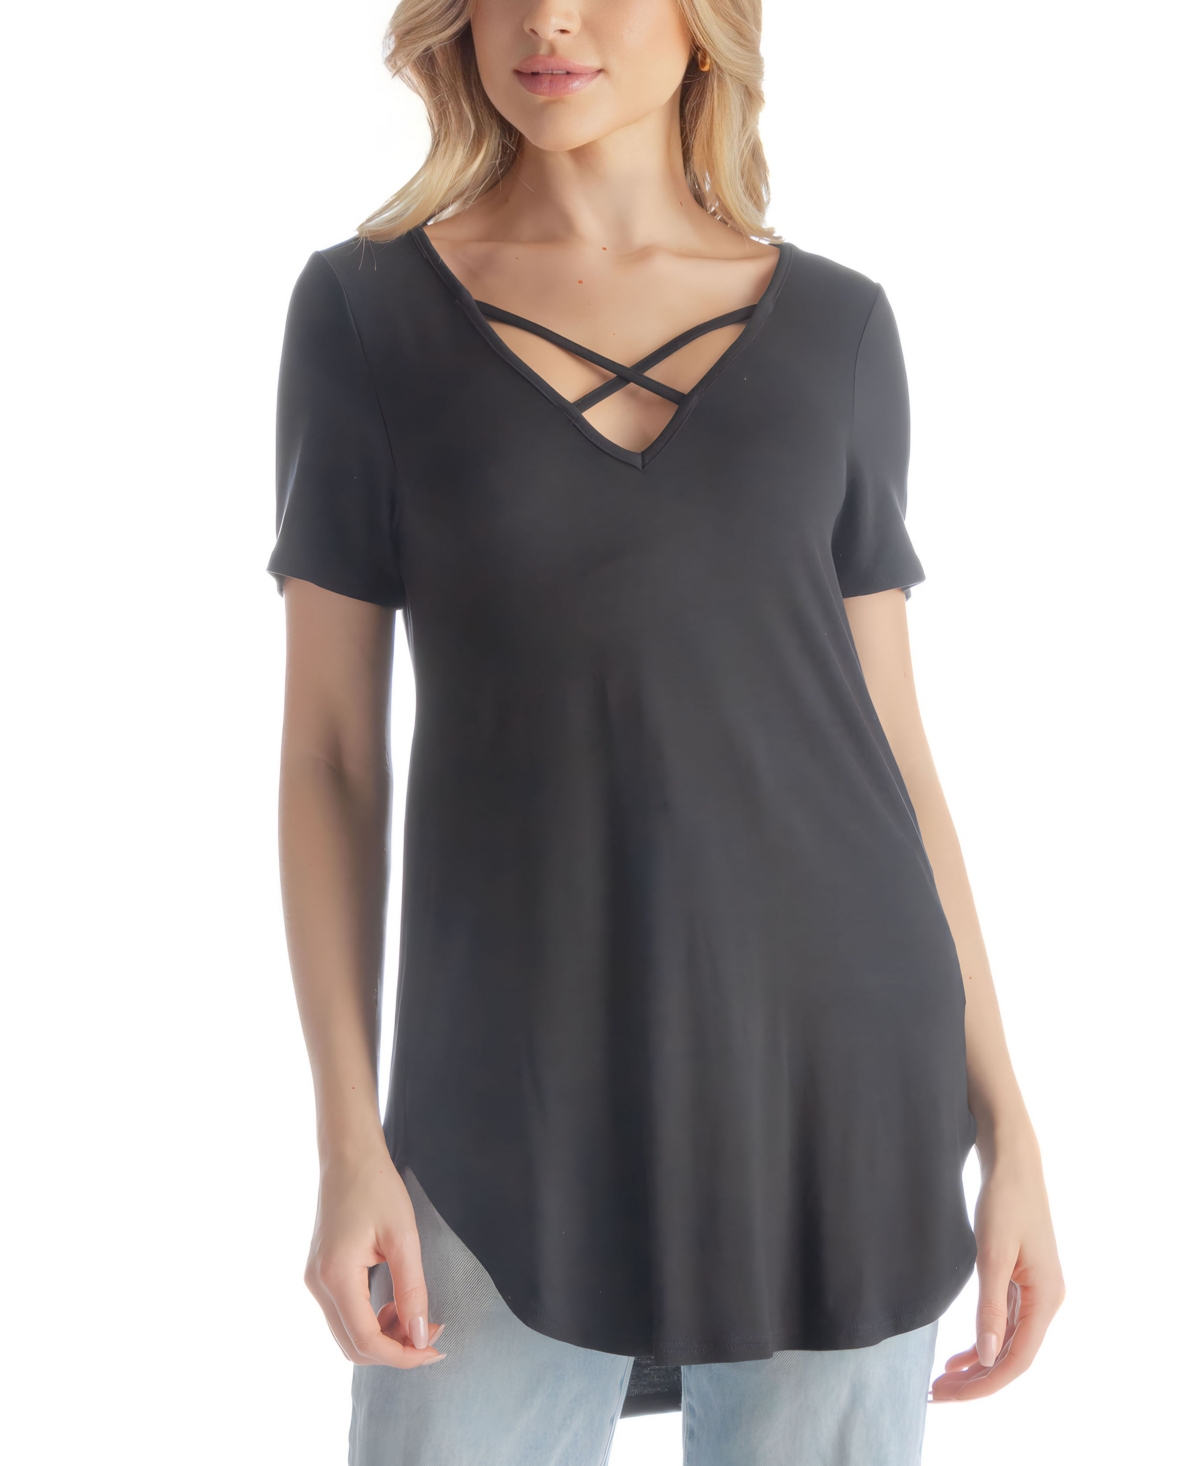 24seven Comfort Apparel Women's V-neck T-shirt With Crossed Collarline In Black